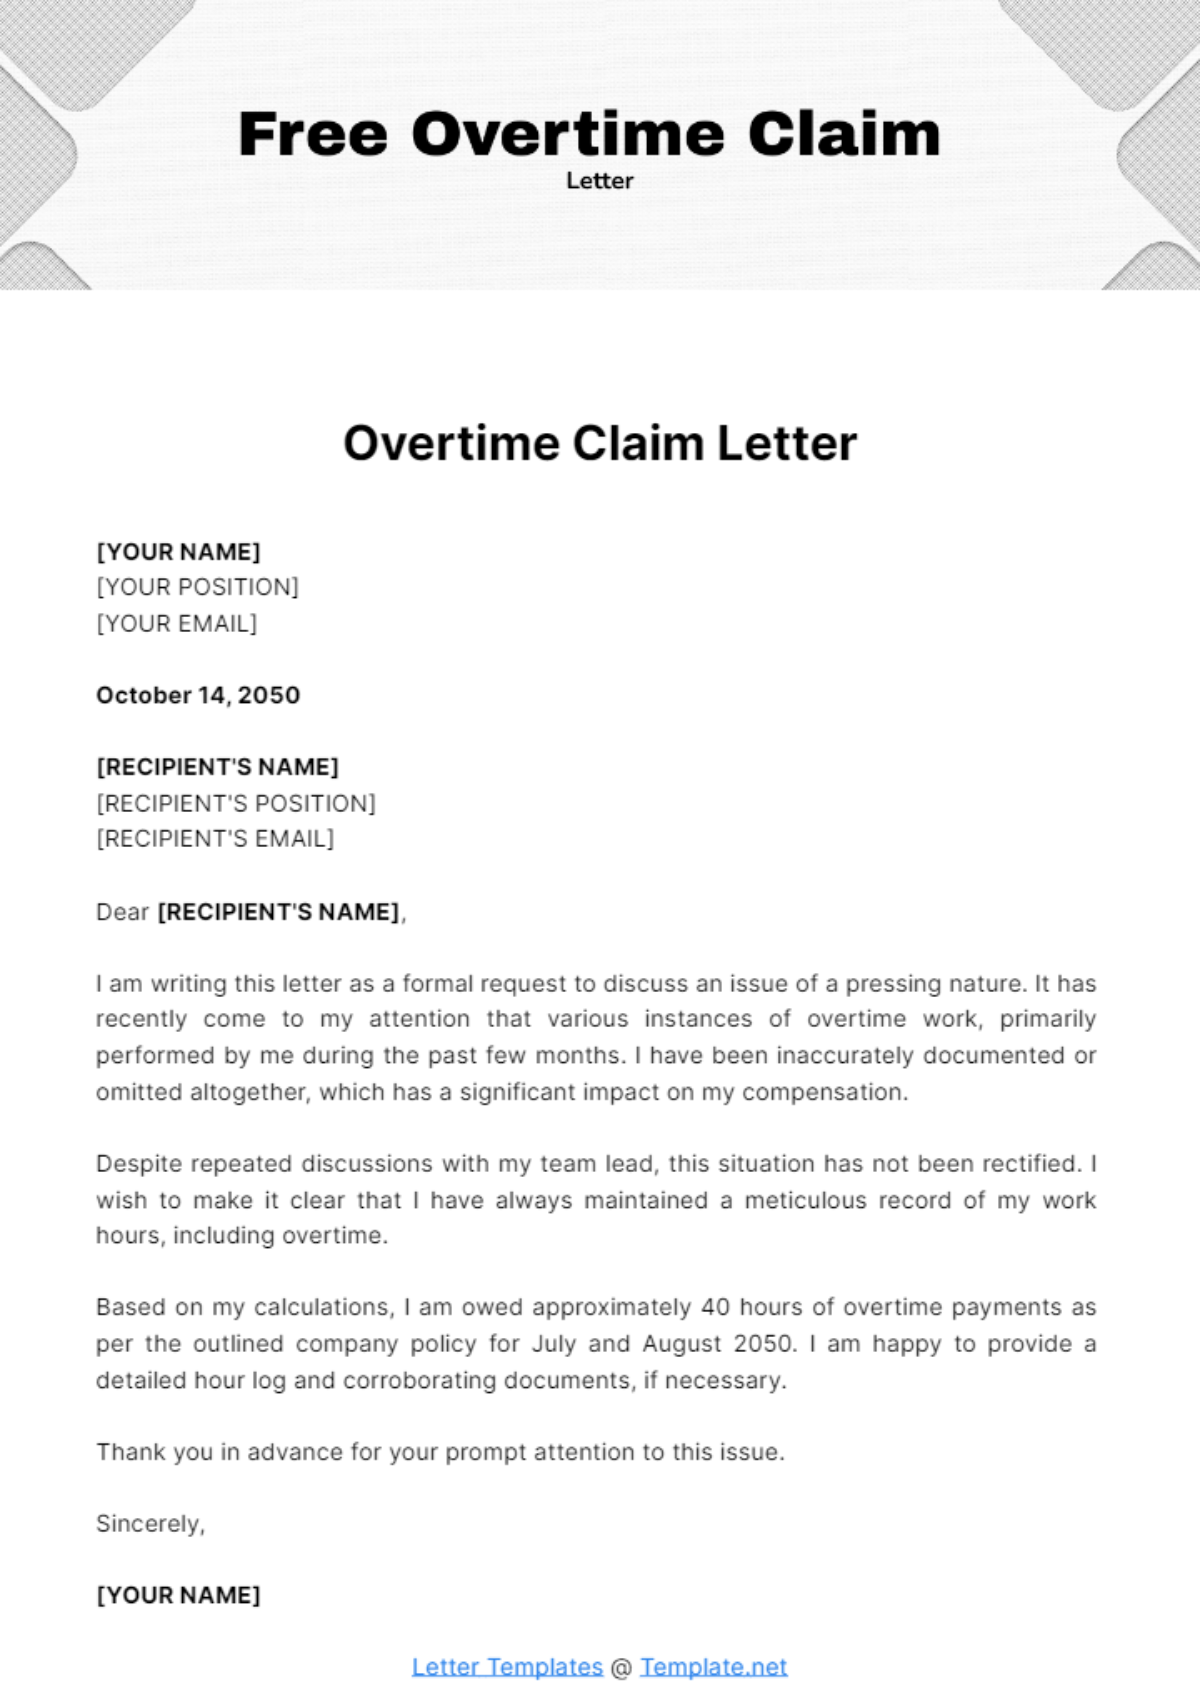 Free Overtime Claim Letter Template